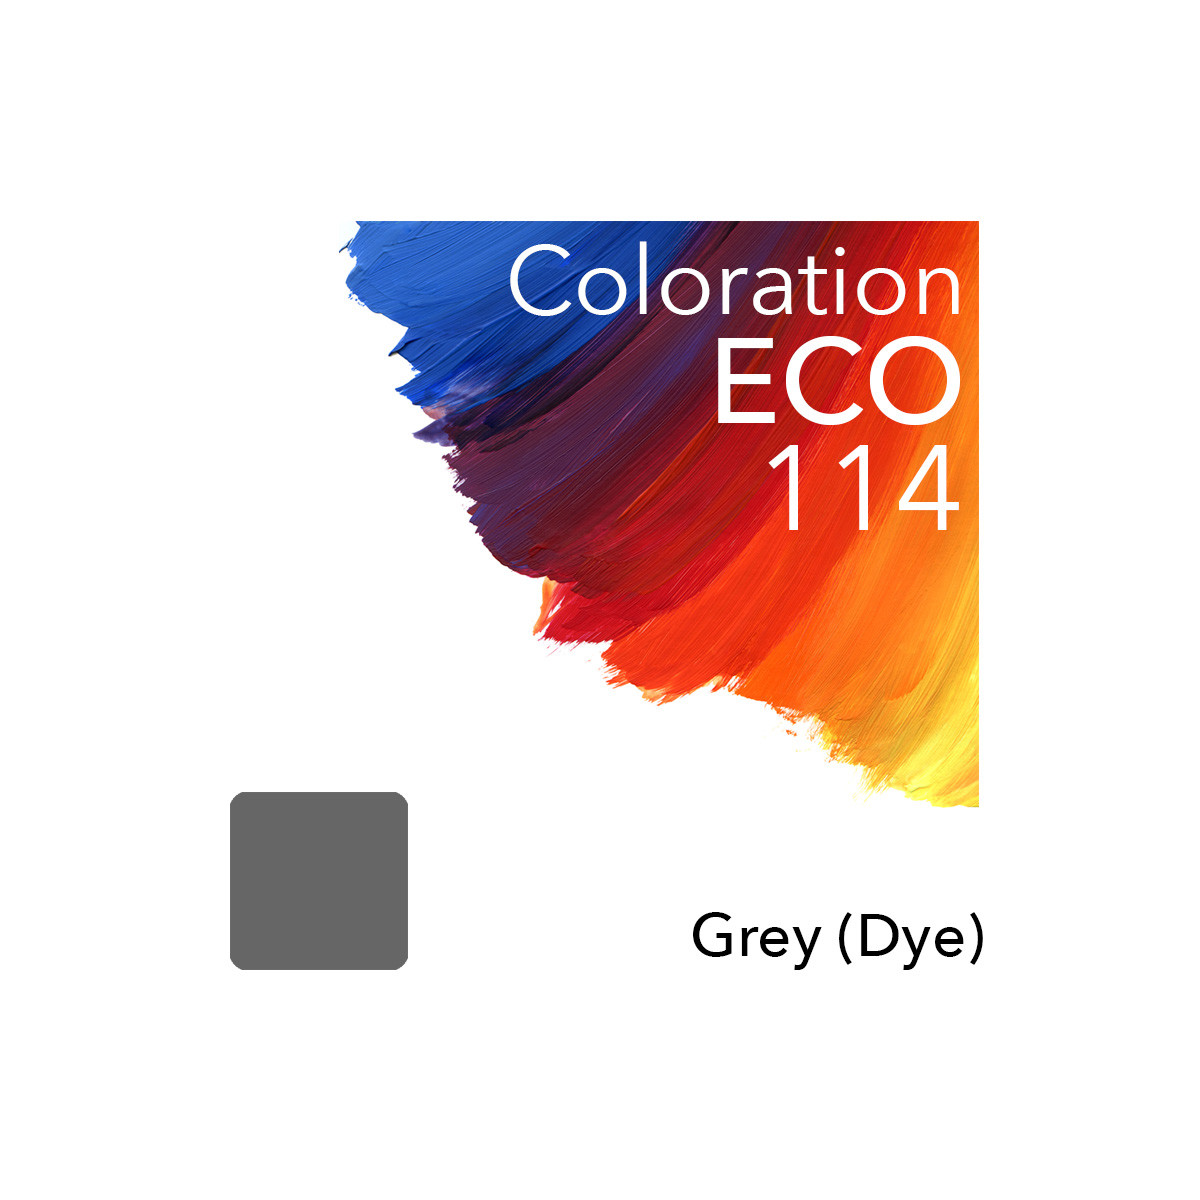 Coloration ECO compatible to Epson 114 GY (Grey)